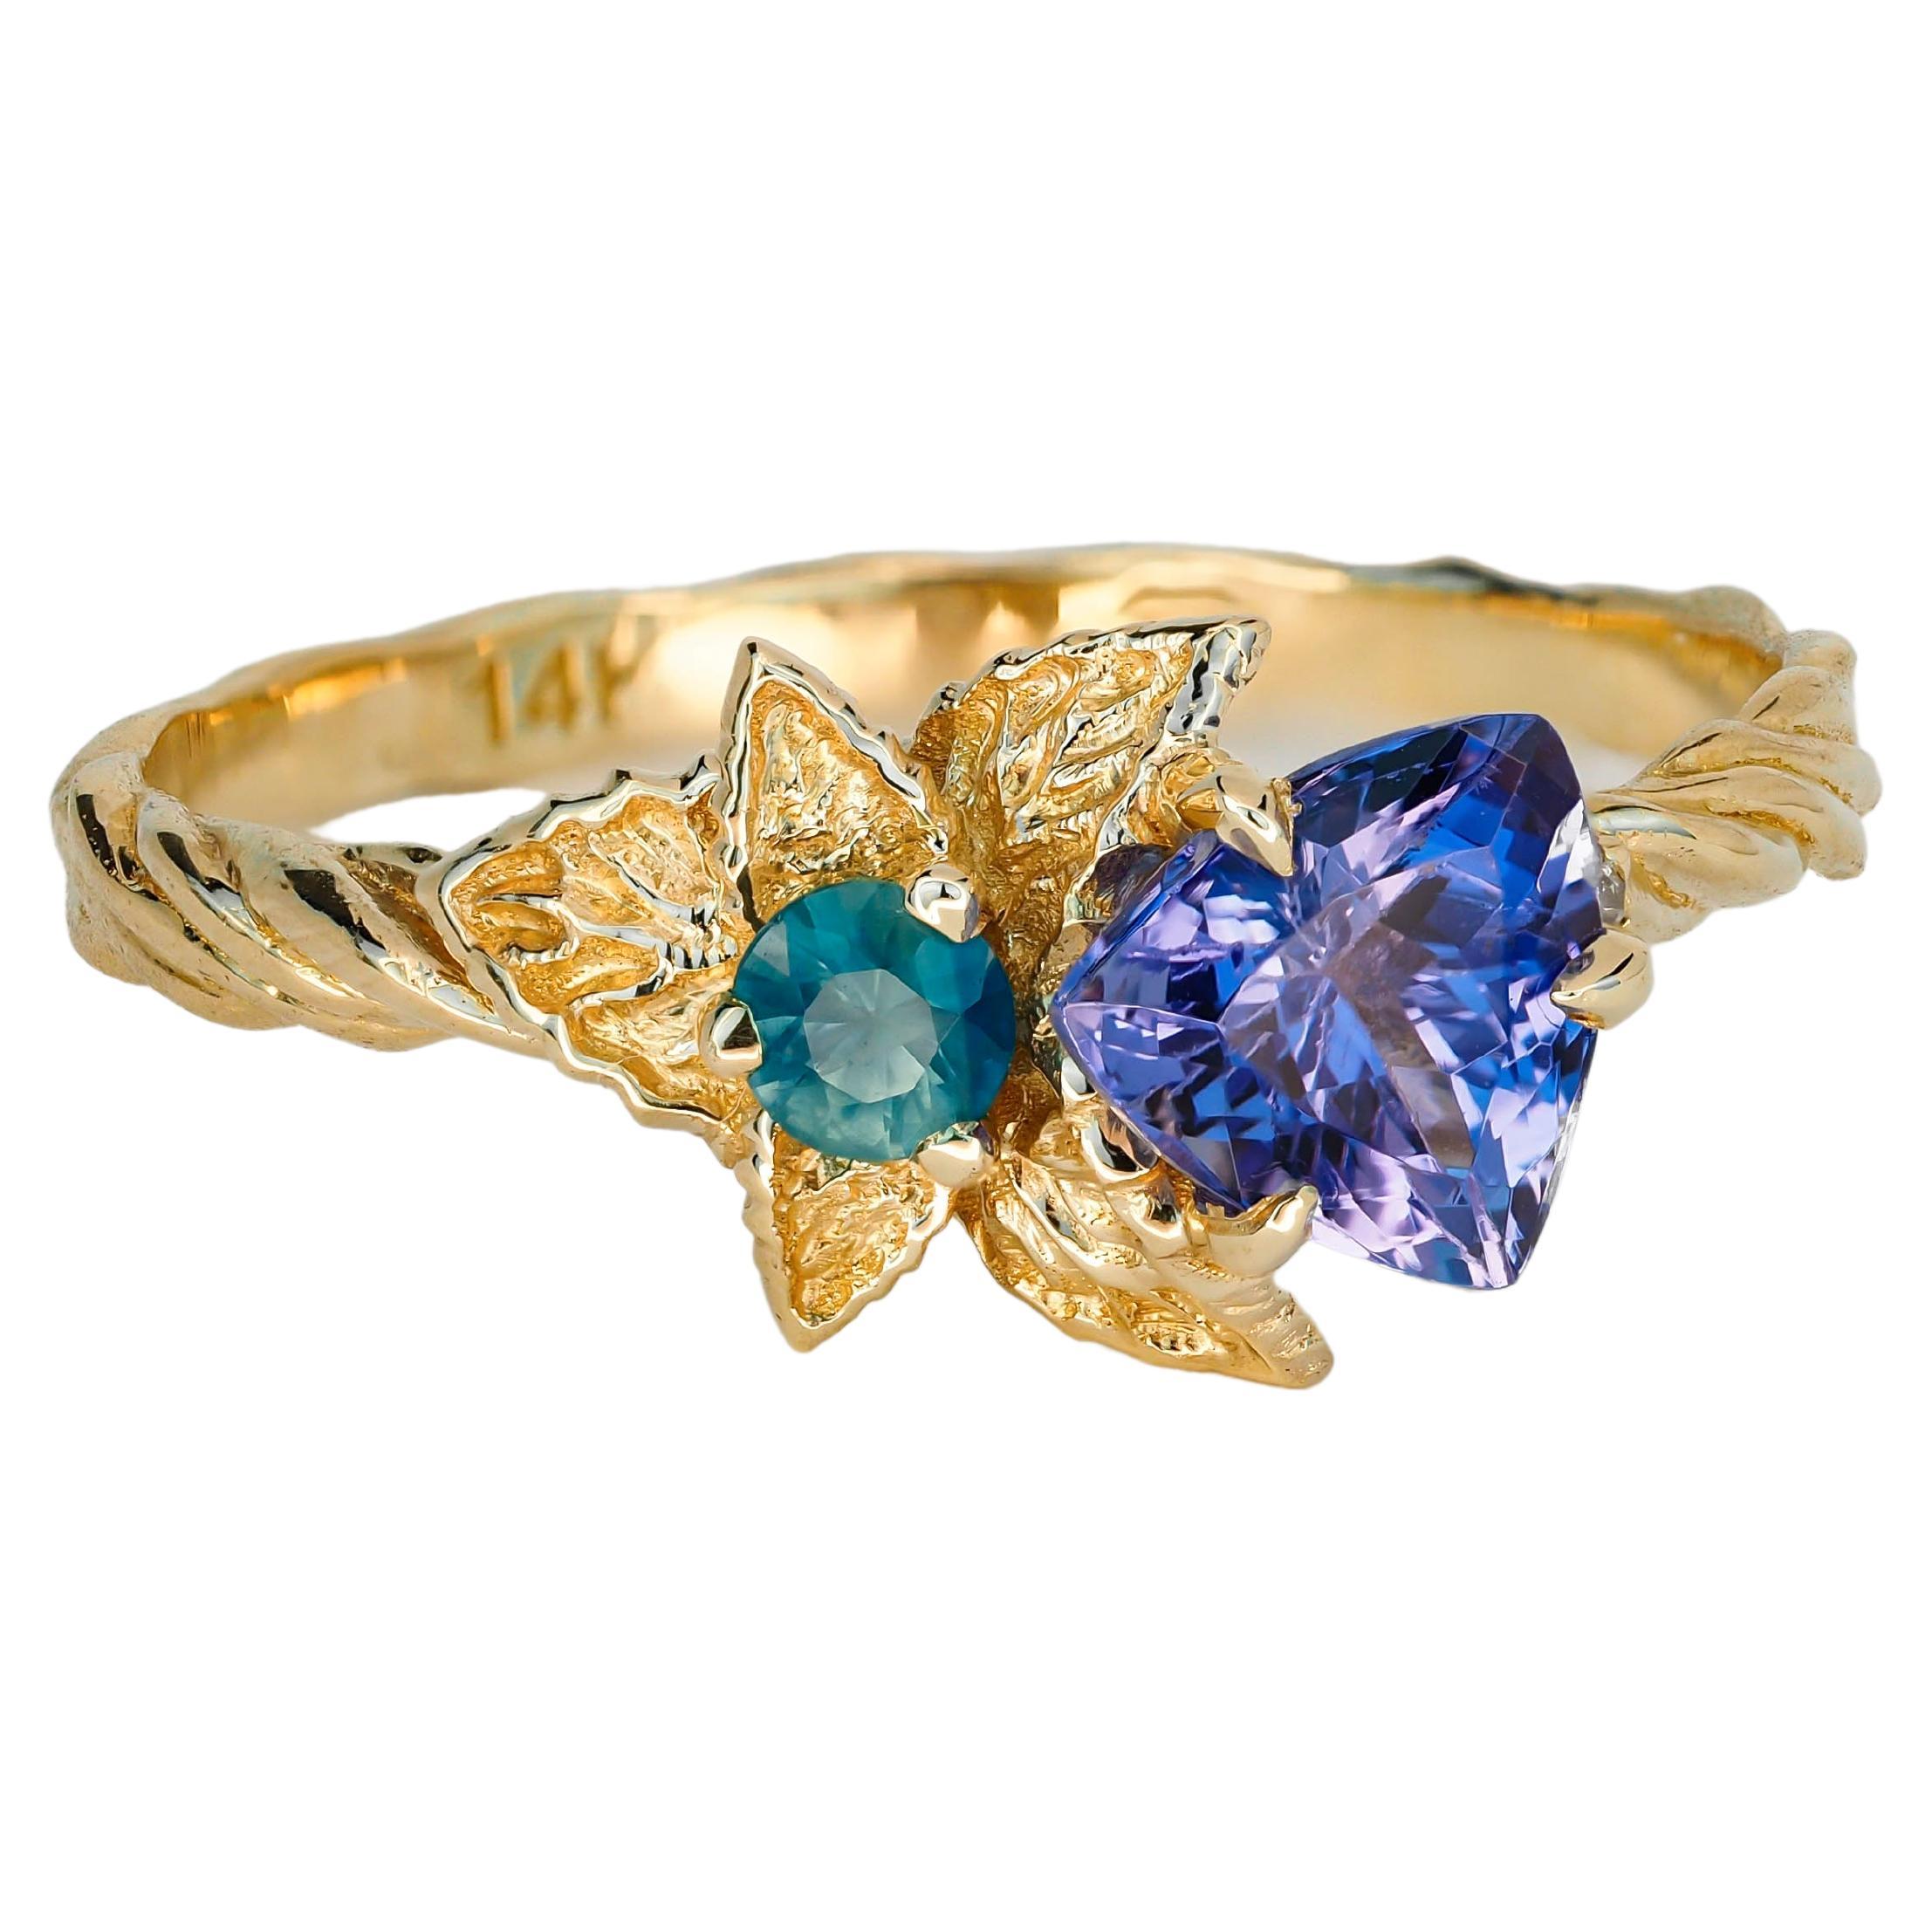 For Sale:  Tanzanite and diamonds 14k gold ring. Flower design ring with tanzanite.